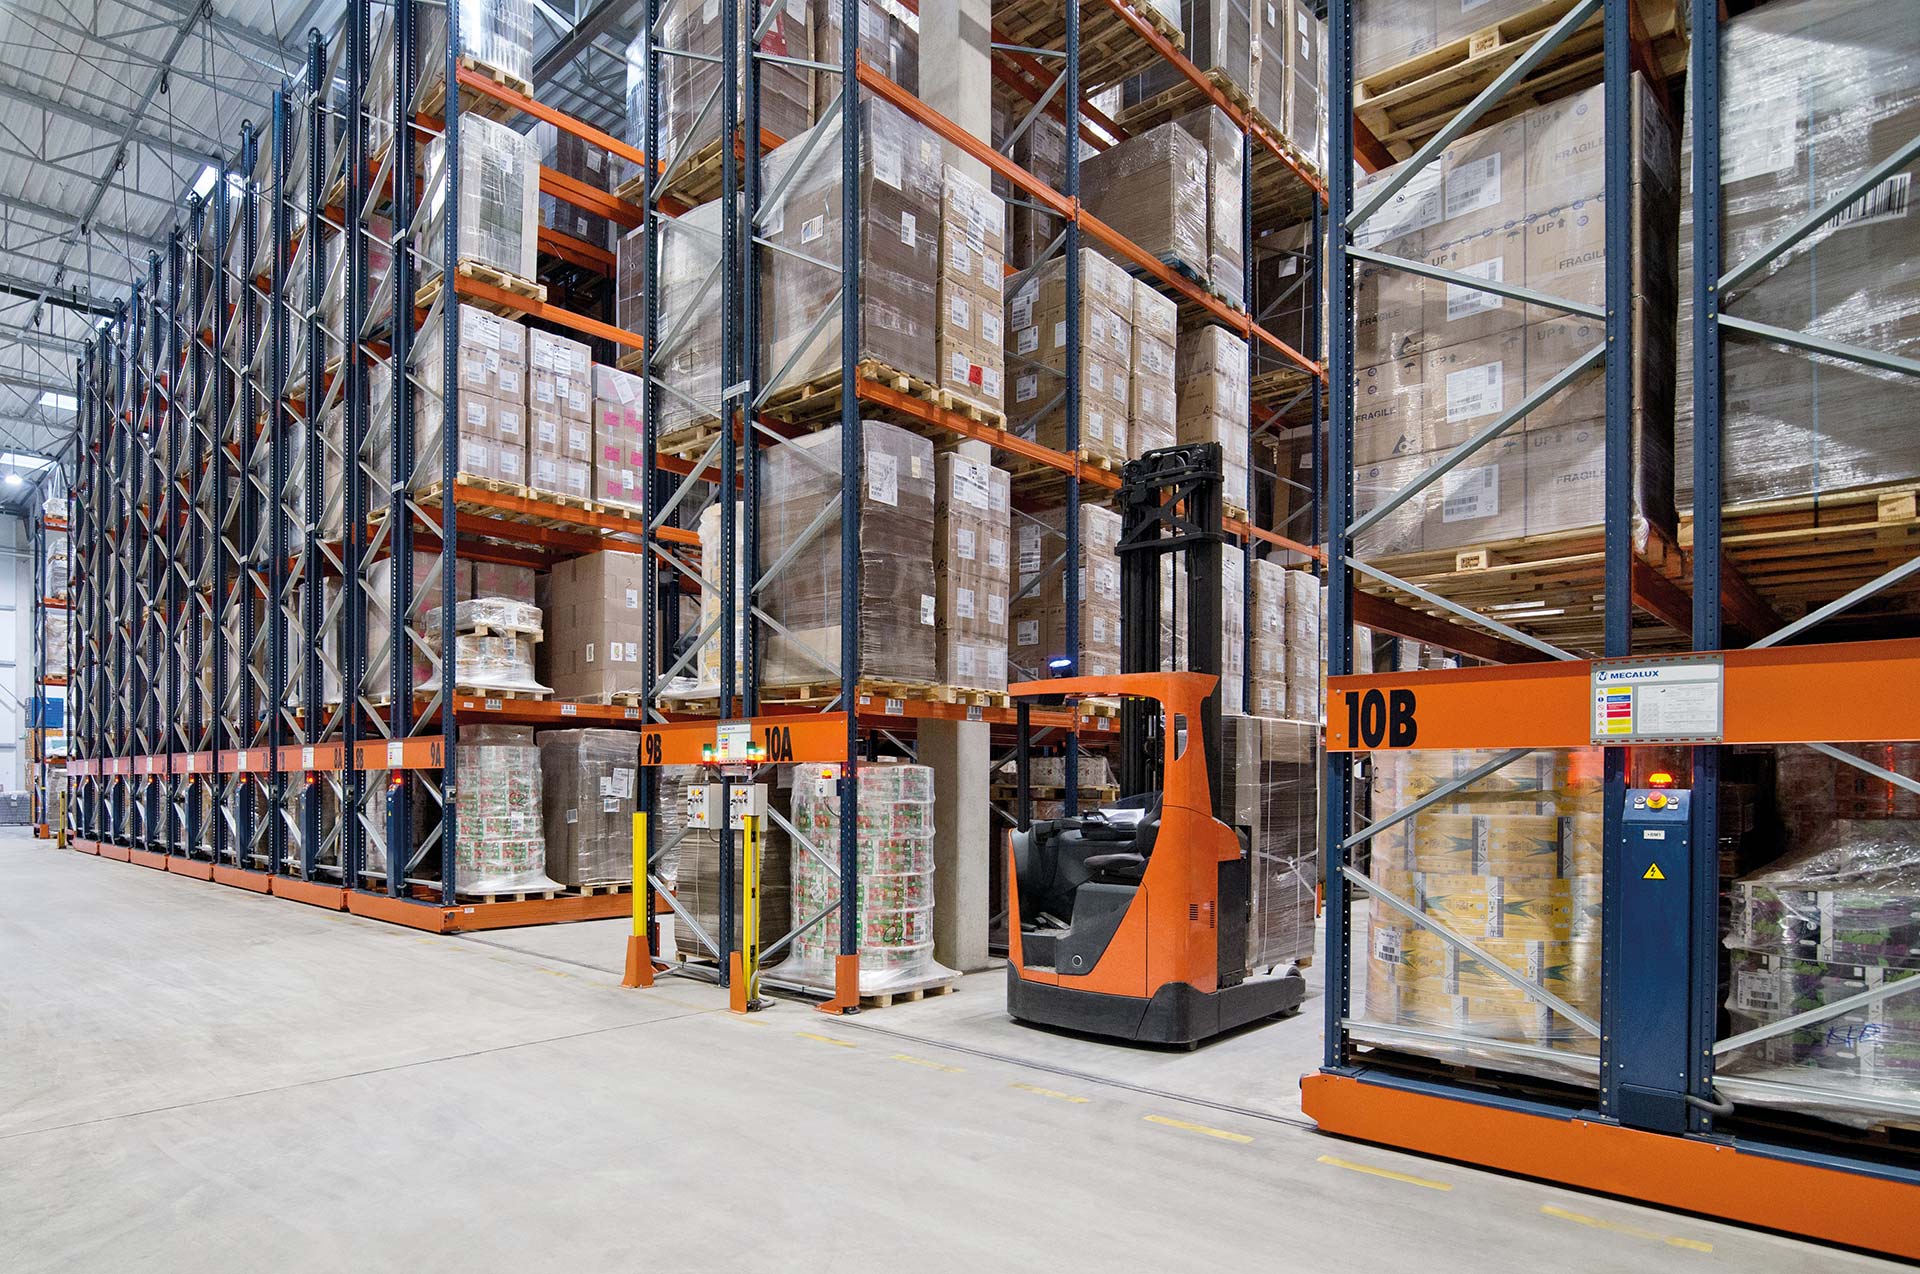 This storage system can be combined with fixed racks to achieve maximum warehouse performance